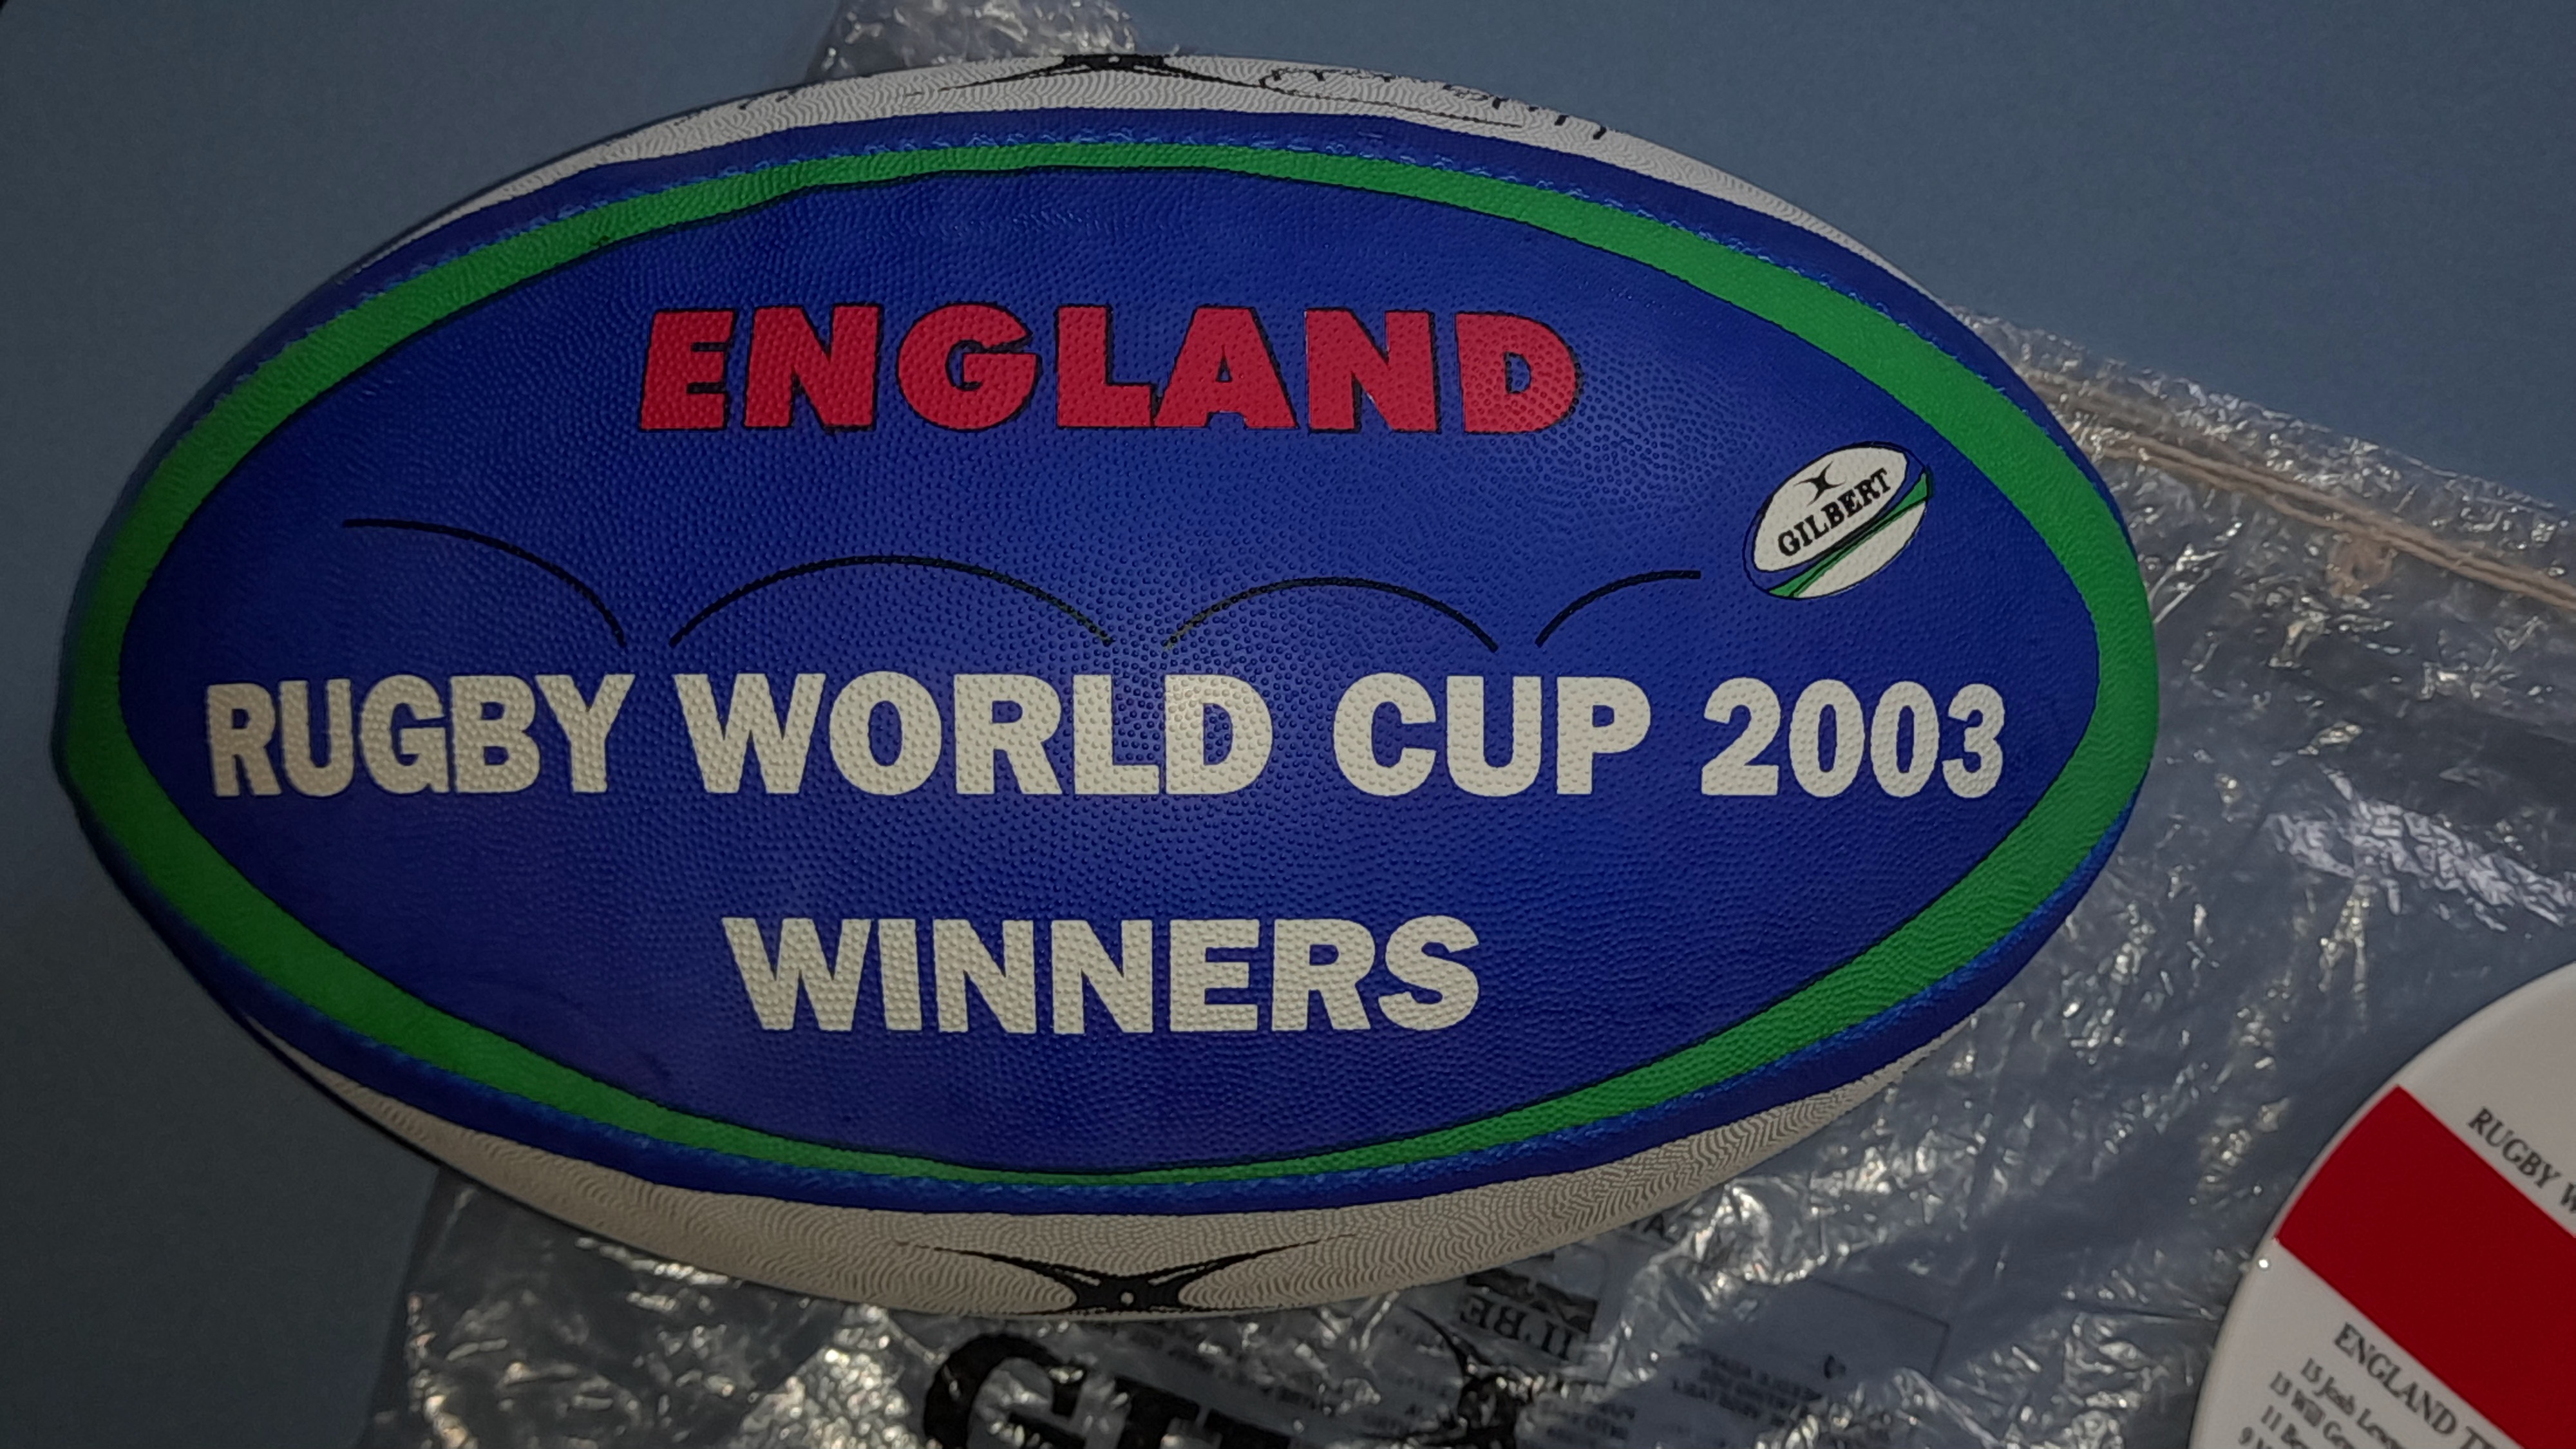 ENGLAND 2003 RUGBY UNION WORLD CUP WINNERS AUTOGRAPHED BALL - Image 4 of 8